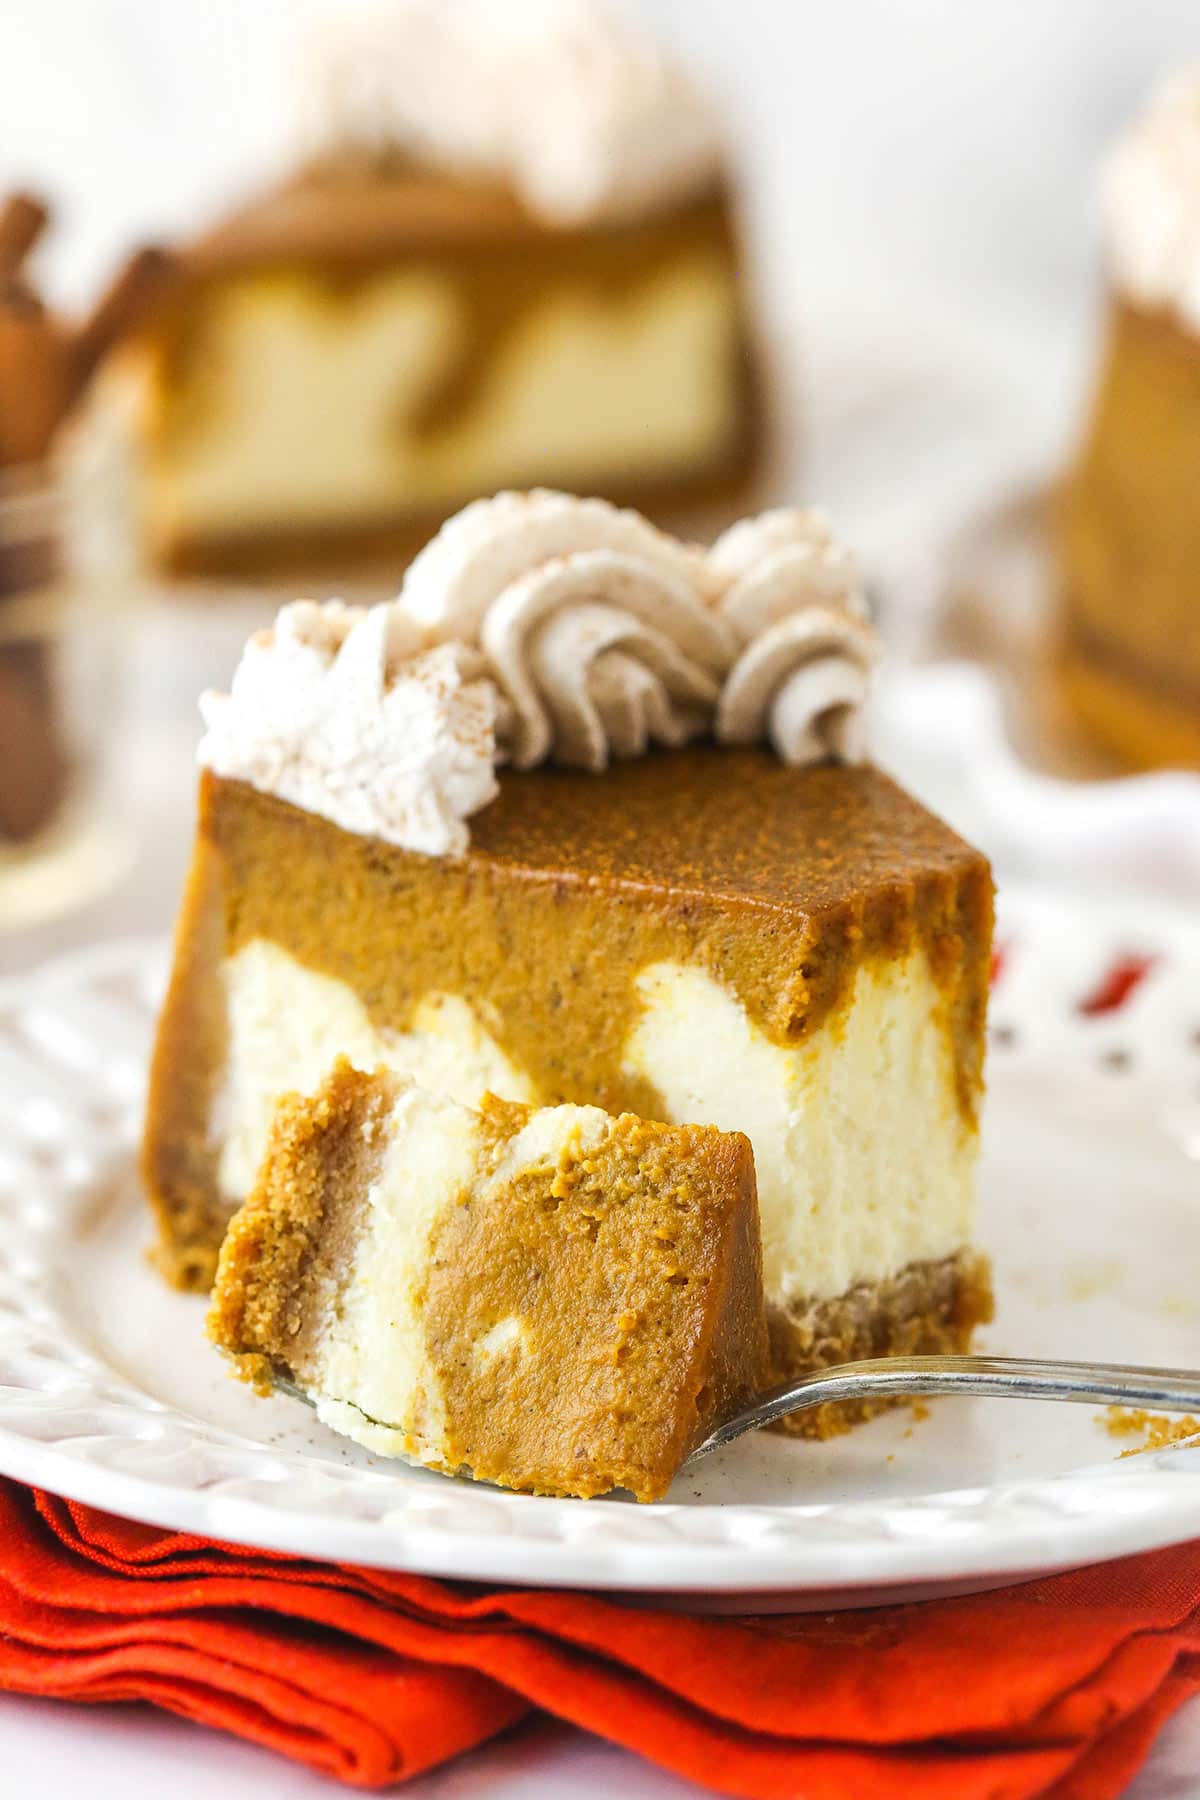 A fork taking a bite out of of a slice of pumpkin cheesecake on a plate.